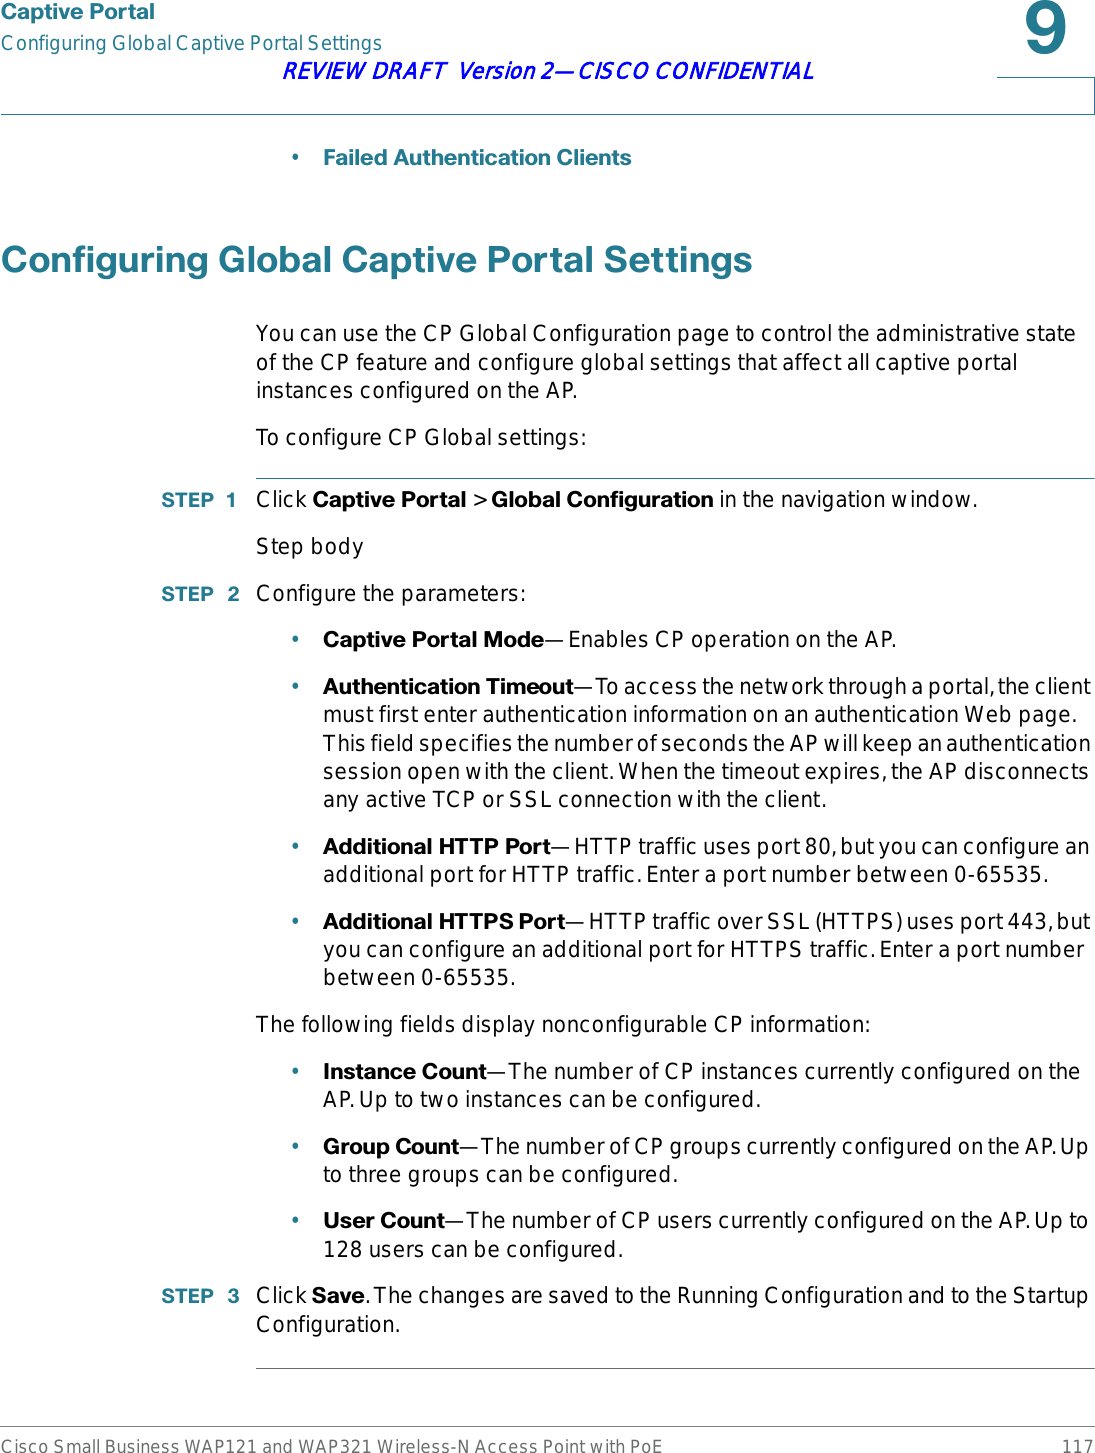 &amp;DSWLYH3RUWDOConfiguring Global Captive Portal SettingsCisco Small Business WAP121 and WAP321 Wireless-N Access Point with PoE 117REVIEW DRAFT  Version 2—CISCO CONFIDENTIAL•)DLOHG$XWKHQWLFDWLRQ&amp;OLHQWV&amp;RQILJXULQJ*OREDO&amp;DSWLYH3RUWDO6HWWLQJVYou can use the CP Global Configuration page to control the administrative state of the CP feature and configure global settings that affect all captive portal instances configured on the AP.To configure CP Global settings:67(3  Click &amp;DSWLYH3RUWDO &gt; *OREDO&amp;RQILJXUDWLRQin the navigation window.Step body67(3  Configure the parameters:•&amp;DSWLYH3RUWDO0RGH—Enables CP operation on the AP.•$XWKHQWLFDWLRQ7LPHRXW—To access the network through a portal, the client must first enter authentication information on an authentication Web page. This field specifies the number of seconds the AP will keep an authentication session open with the client. When the timeout expires, the AP disconnects any active TCP or SSL connection with the client.•$GGLWLRQDO+7733RUW—HTTP traffic uses port 80, but you can configure an additional port for HTTP traffic. Enter a port number between 0-65535.•$GGLWLRQDO+77363RUW—HTTP traffic over SSL (HTTPS) uses port 443, but you can configure an additional port for HTTPS traffic. Enter a port number between 0-65535.The following fields display nonconfigurable CP information:•,QVWDQFH&amp;RXQW—The number of CP instances currently configured on the AP. Up to two instances can be configured.•*URXS&amp;RXQW—The number of CP groups currently configured on the AP. Up to three groups can be configured.•8VHU&amp;RXQW—The number of CP users currently configured on the AP. Up to 128 users can be configured.67(3  Click 6DYH. The changes are saved to the Running Configuration and to the Startup Configuration.